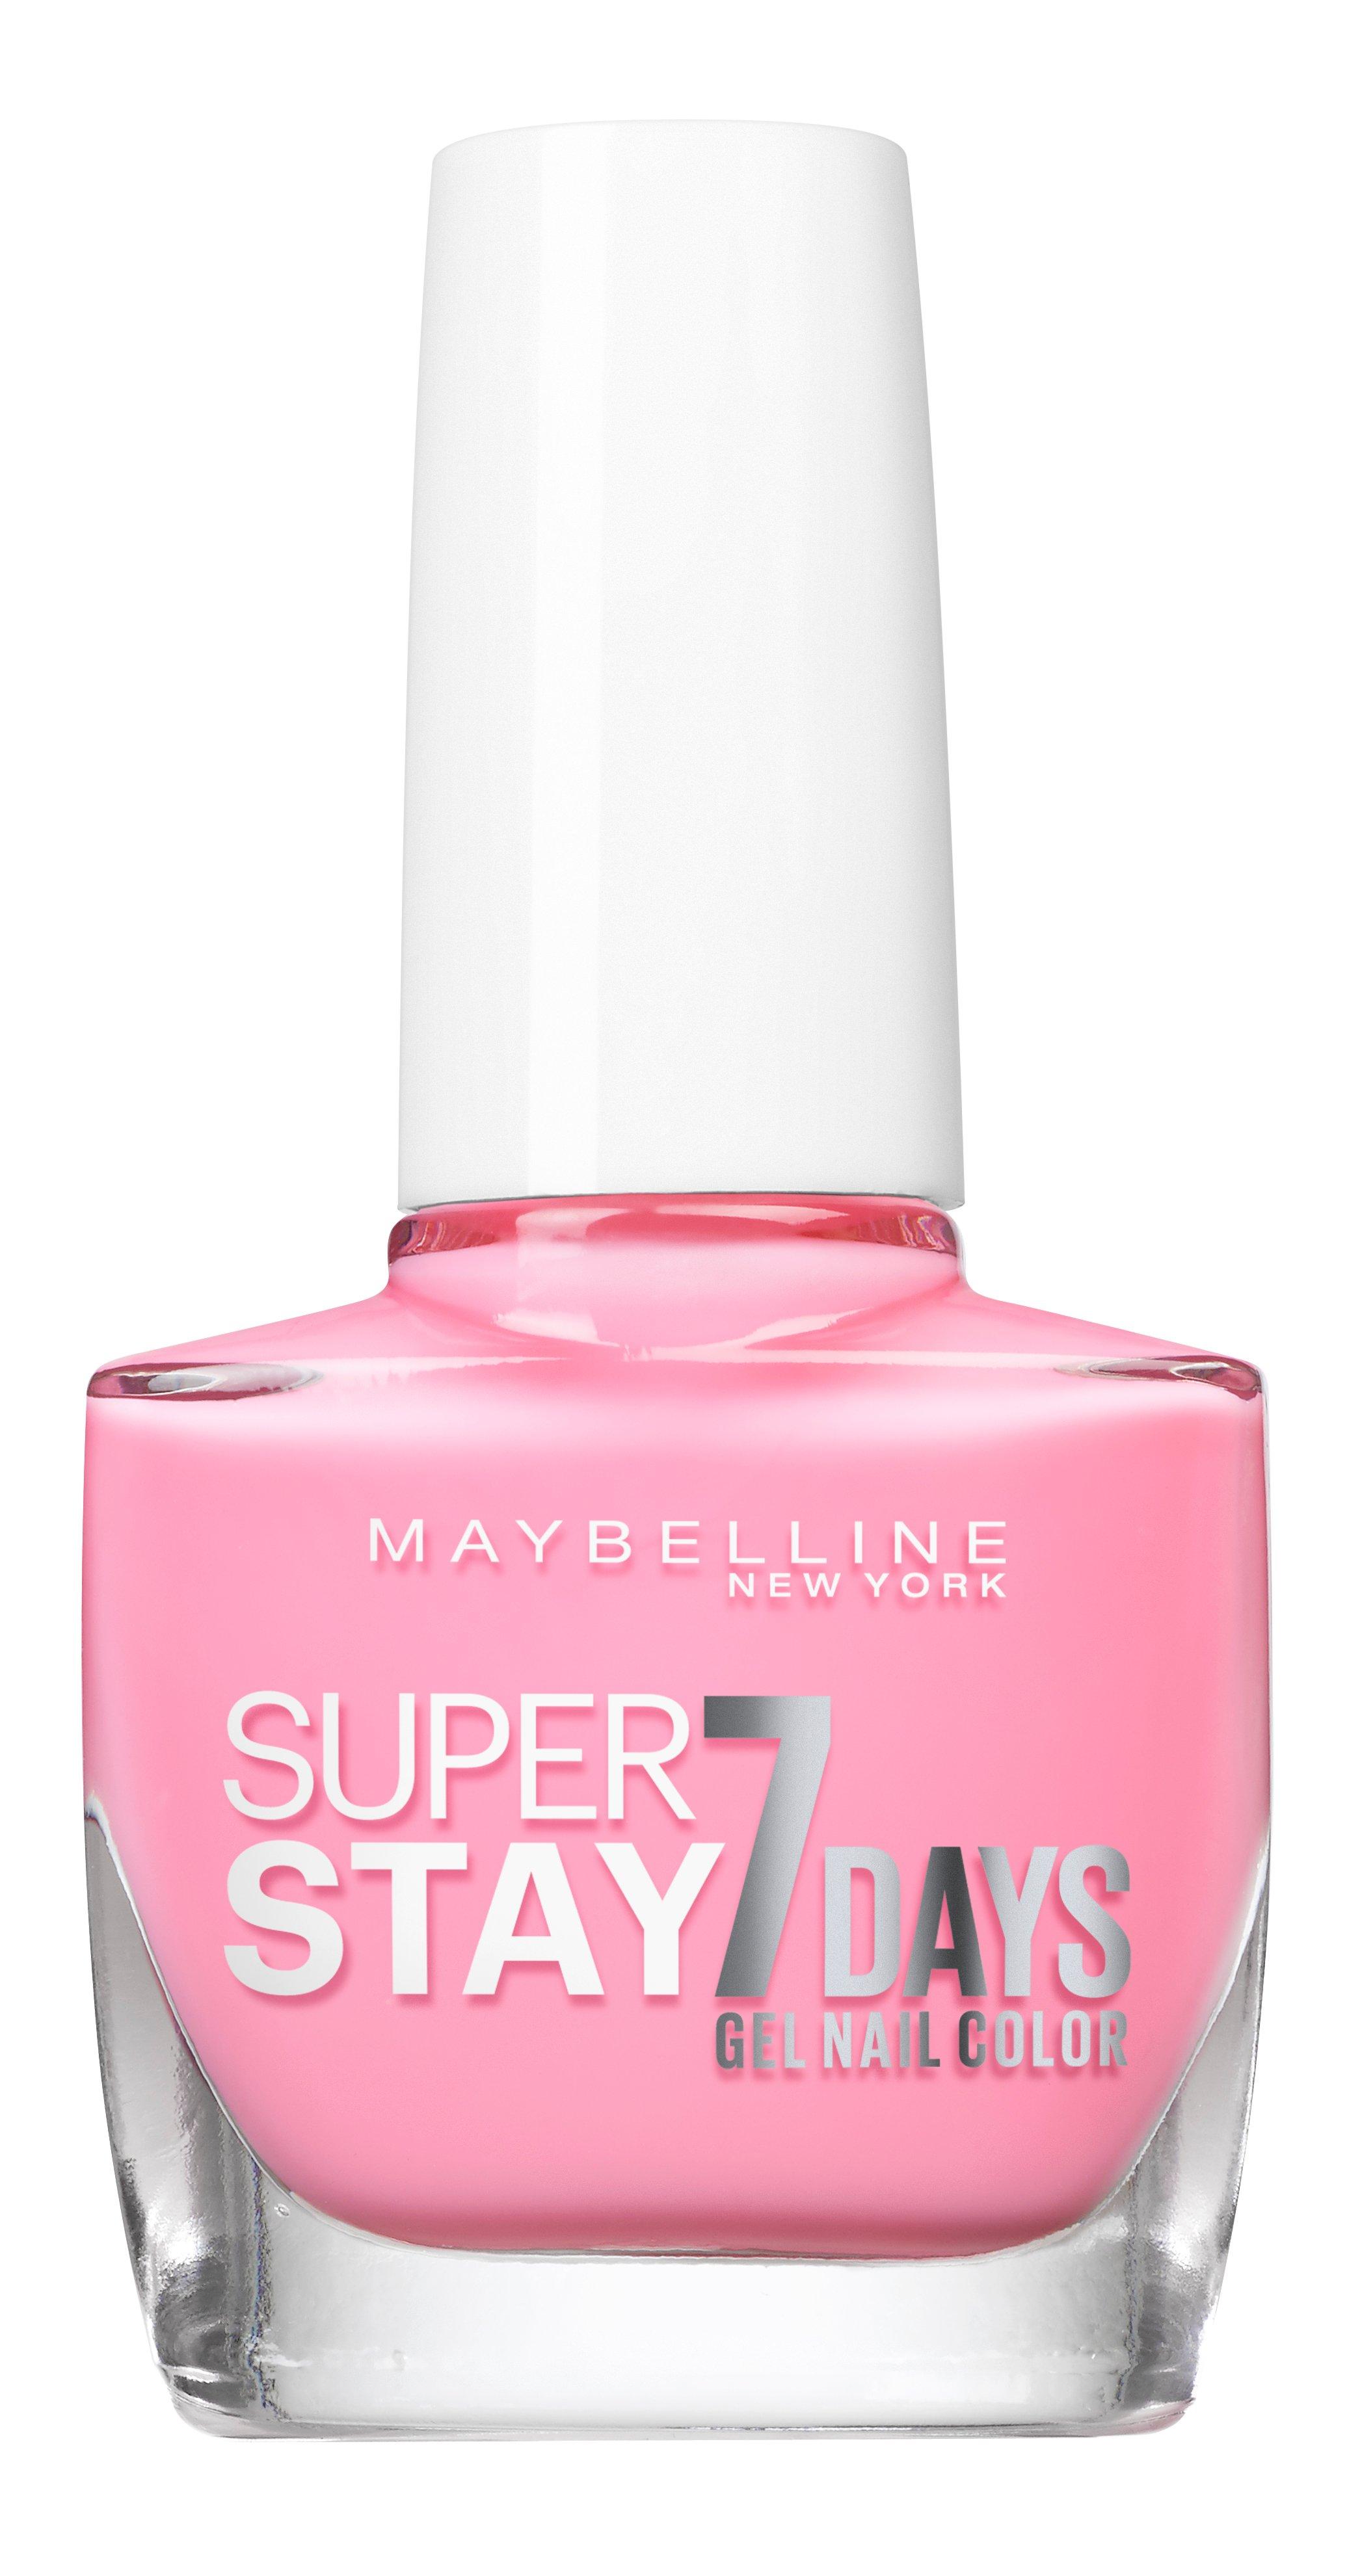 MAYBELLINE Super Stay 7 Days Superstay 7 Days Gel Nail Color 